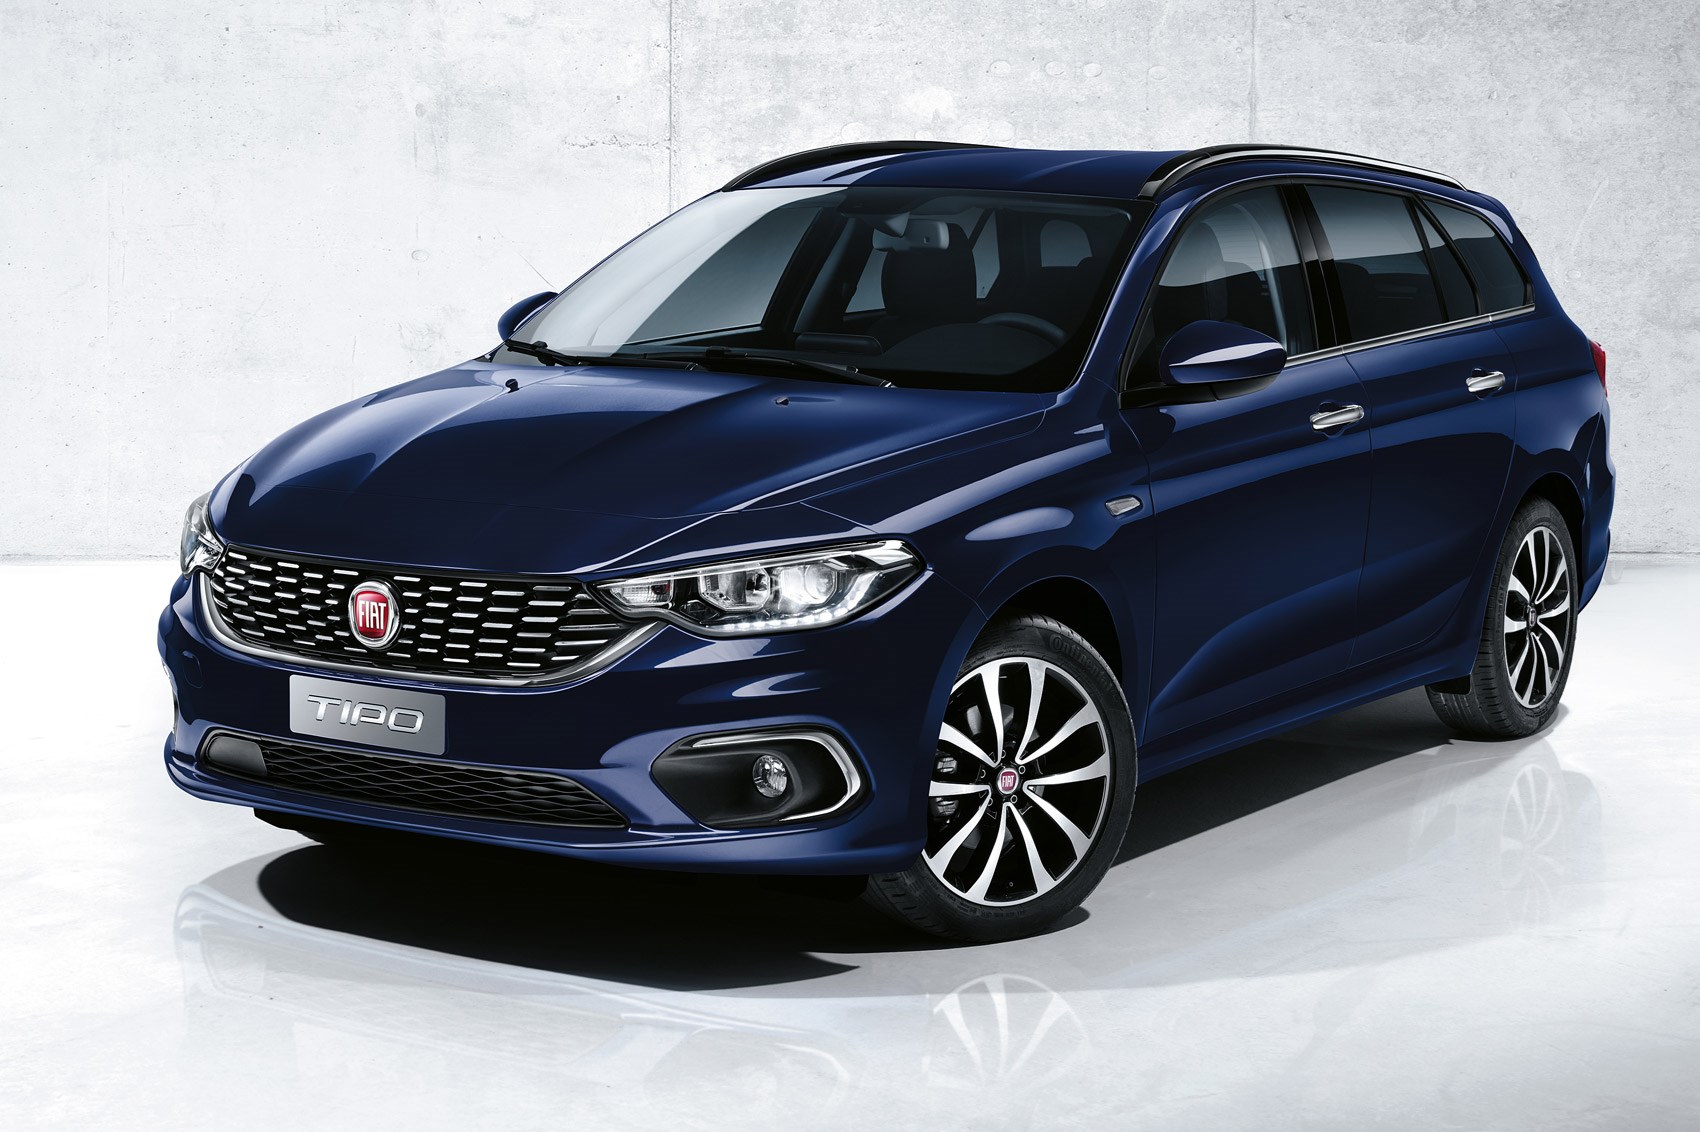 Fiat set to tackle the mainstream with new 2016 Tipo